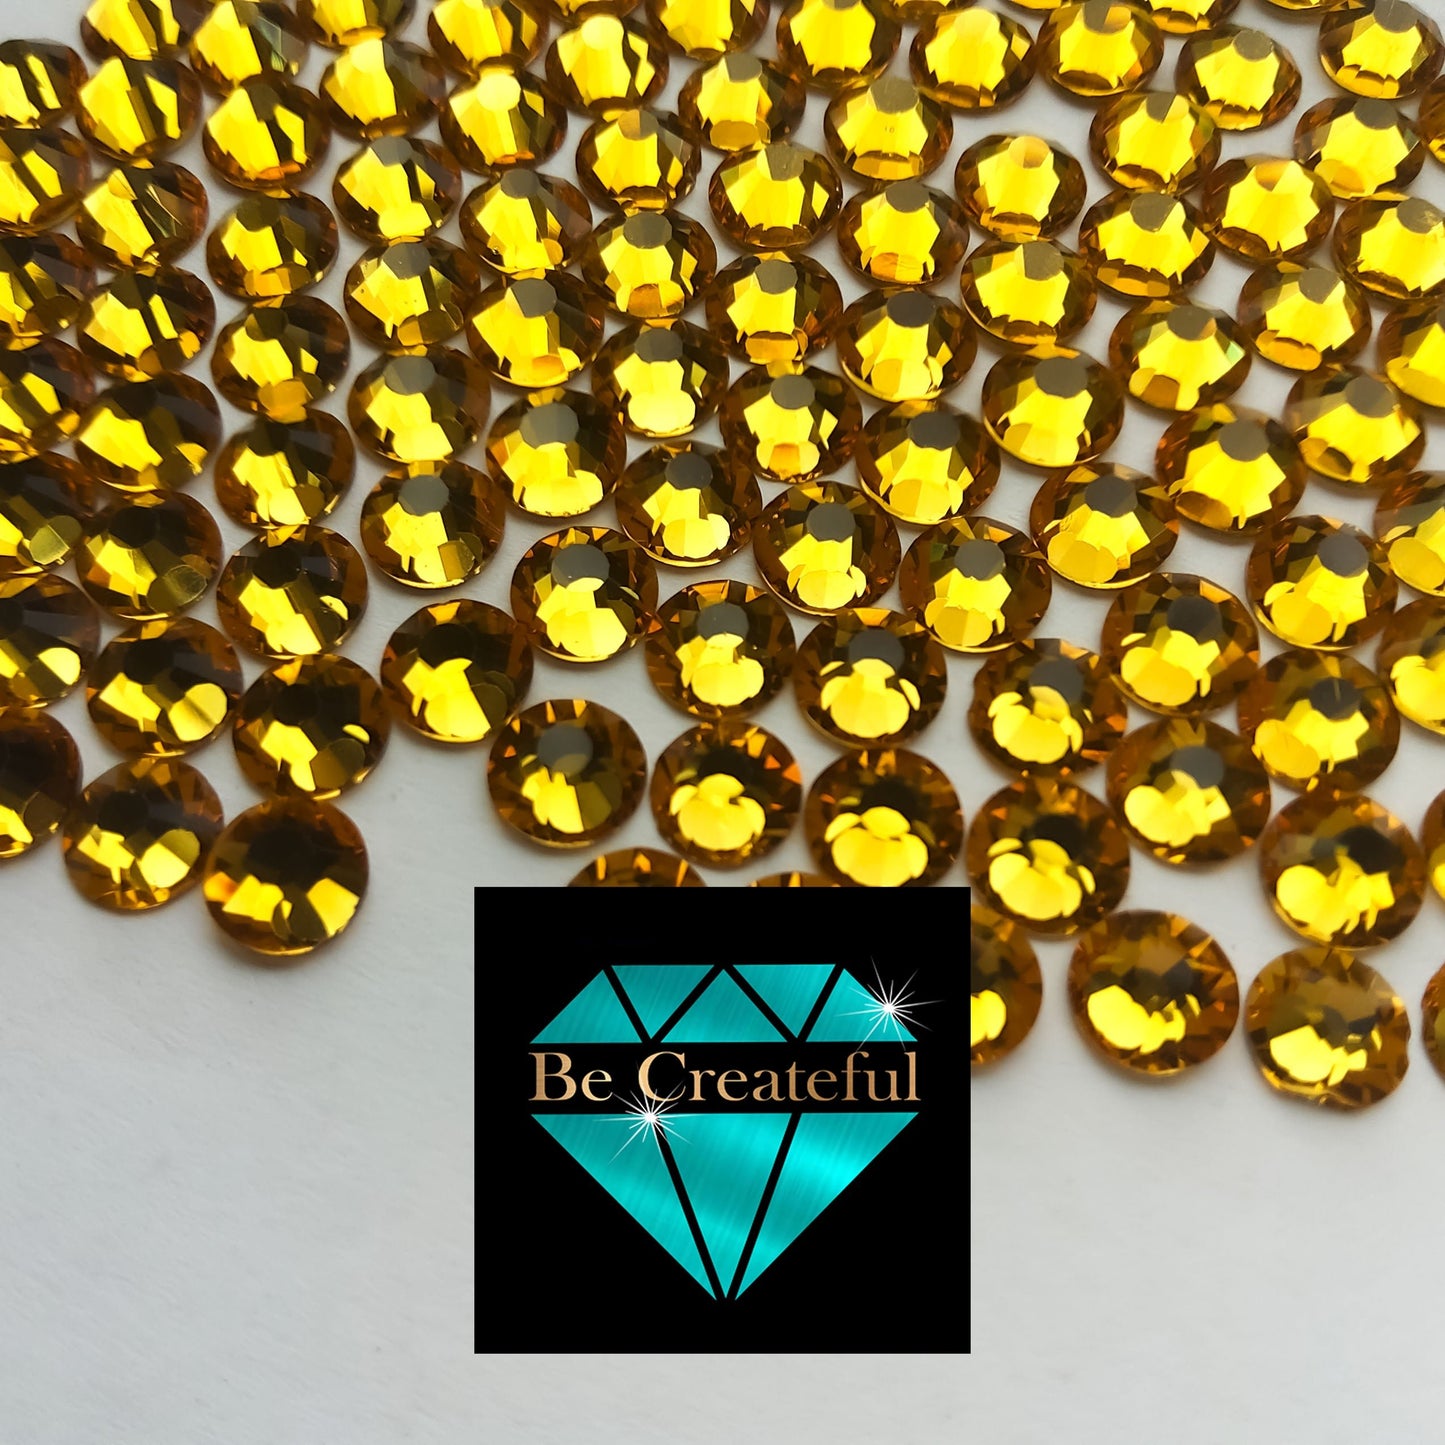 LUXE® Topaz Hotfix Rhinestones are high-quality 16 facet glass Rhinestone that provides intense sparkle and refraction.